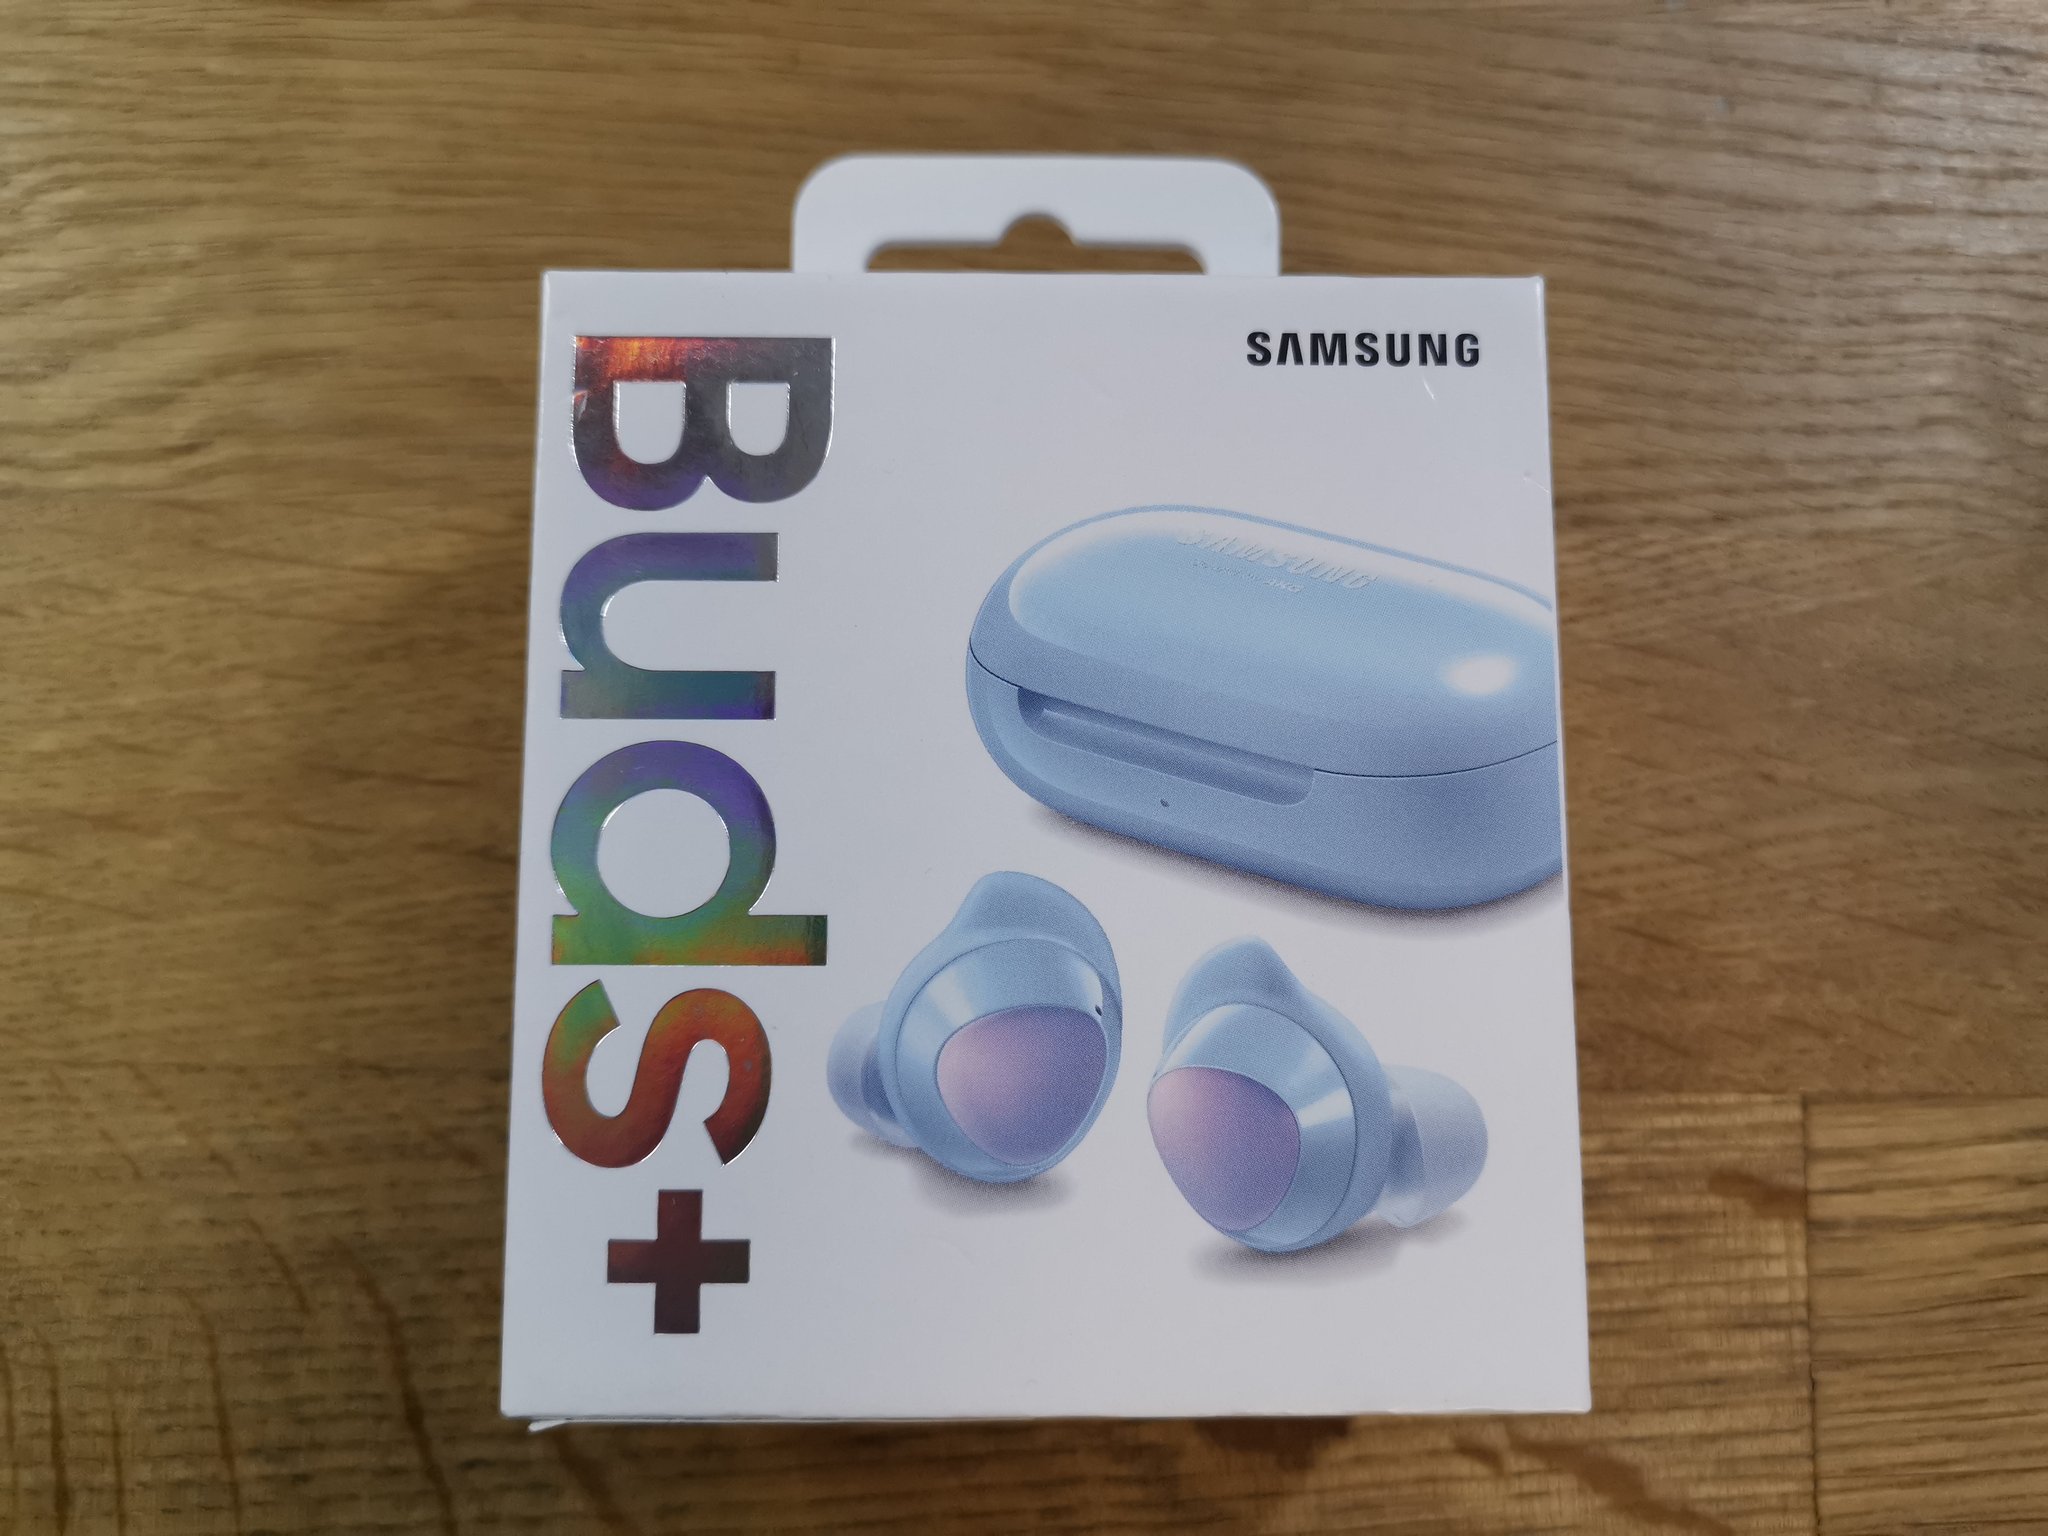 Samsung Galaxy Buds+ review: All about the battery, baby - SamMobile